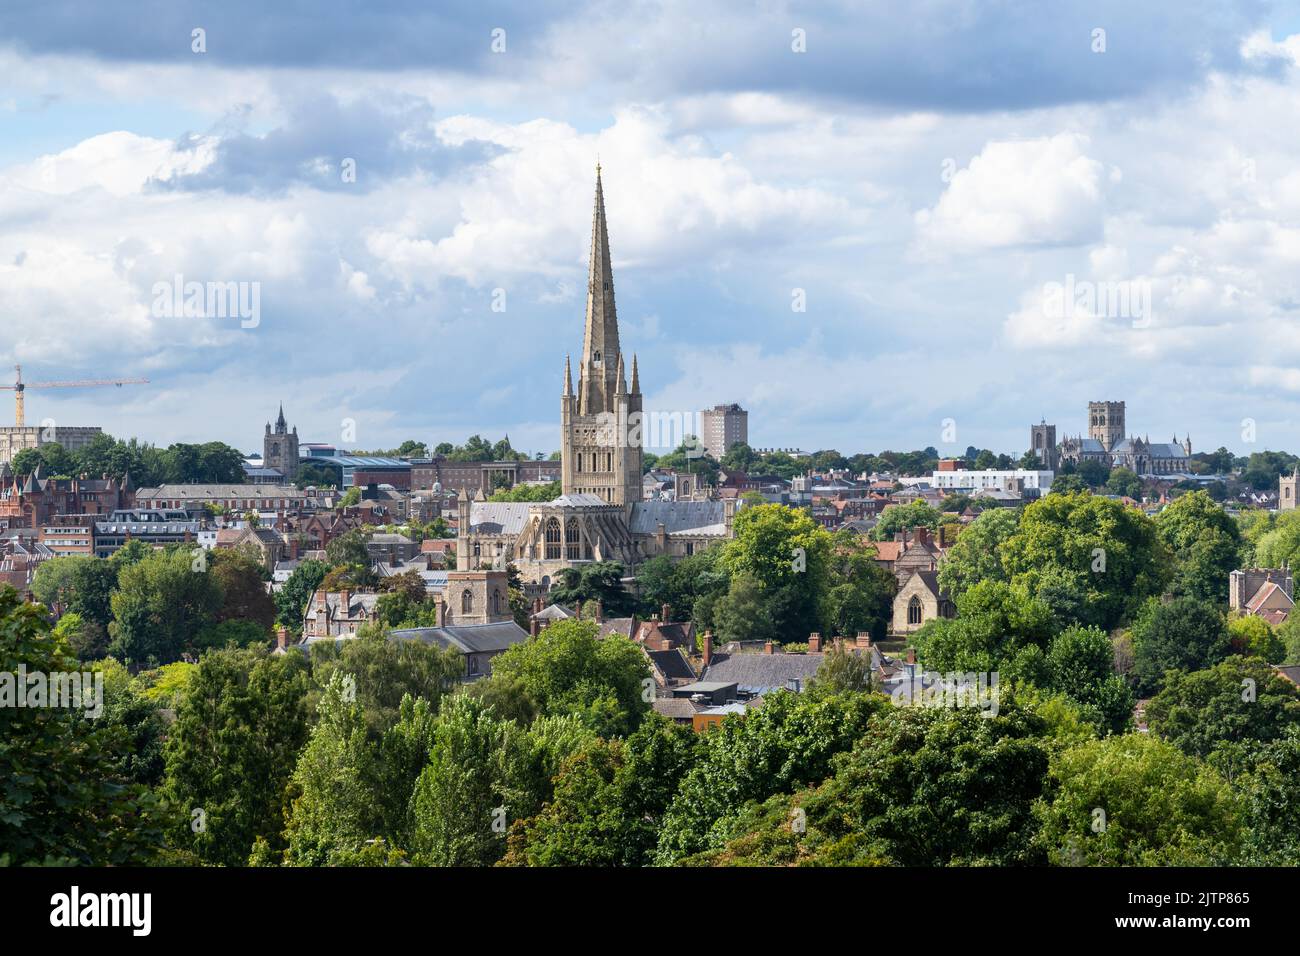 A view of Norwich City Centre showing the two Cathedrals on an overcast summer's day Stock Photo